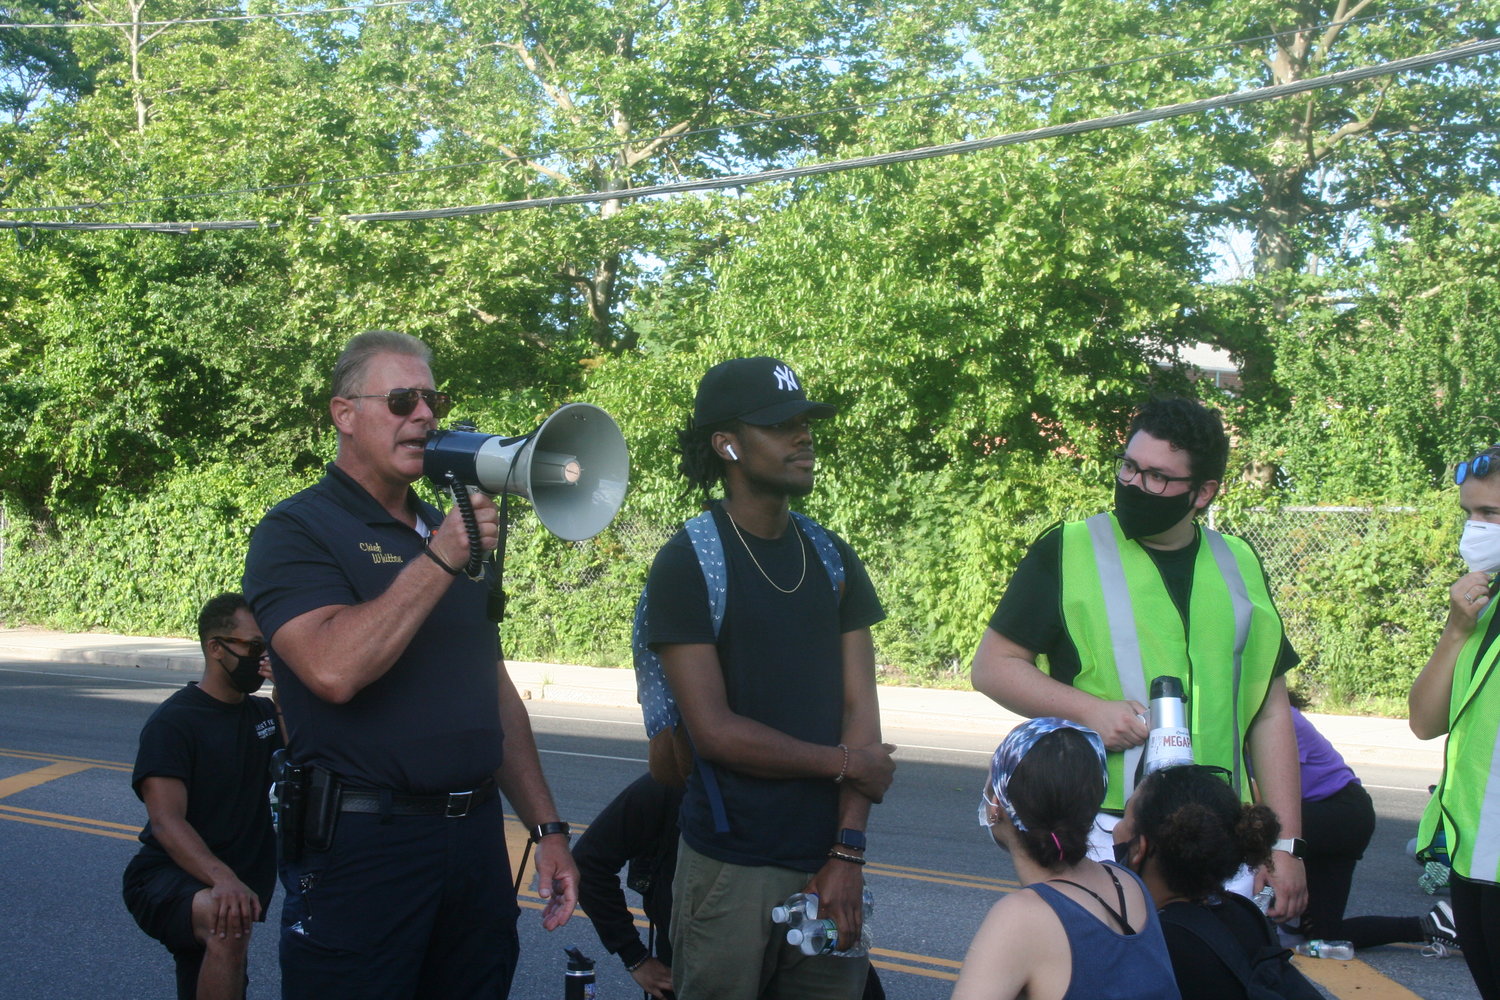 Glen Cove Police Chief William Whitton, left, told the crowd he supported them but would not kneel as Antwan Brown and protest organizer Stevens Martinez listened on.